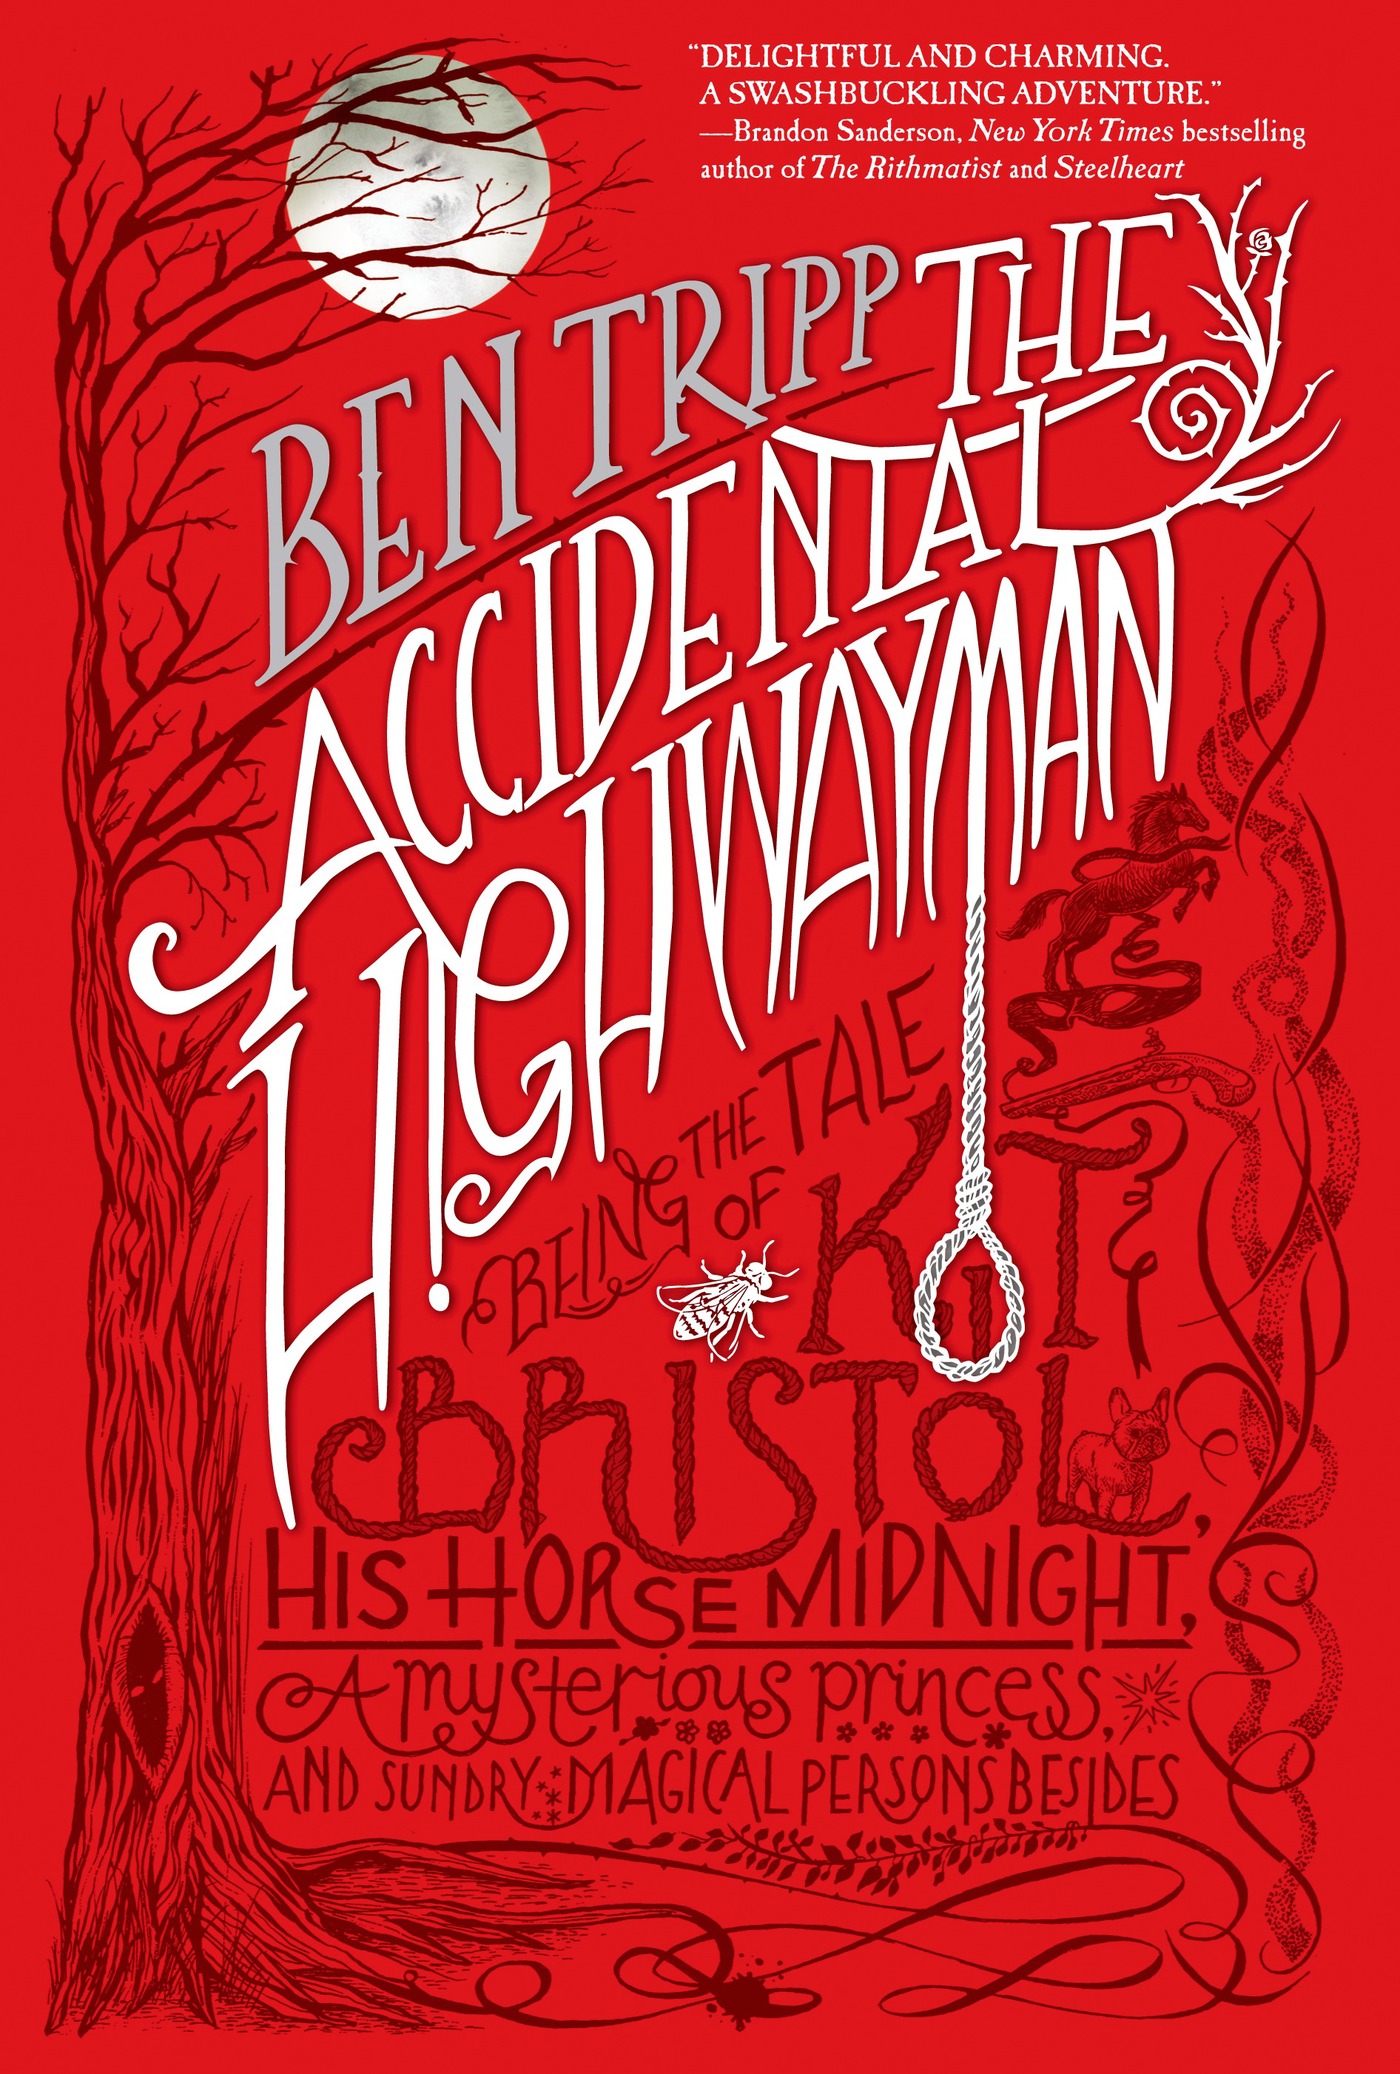 The Accidental Highwayman : Being the Tale of Kit Bristol, His Horse Midnight, a Mysterious Princess, and Sundry Magical Persons Besides by Ben Tripp